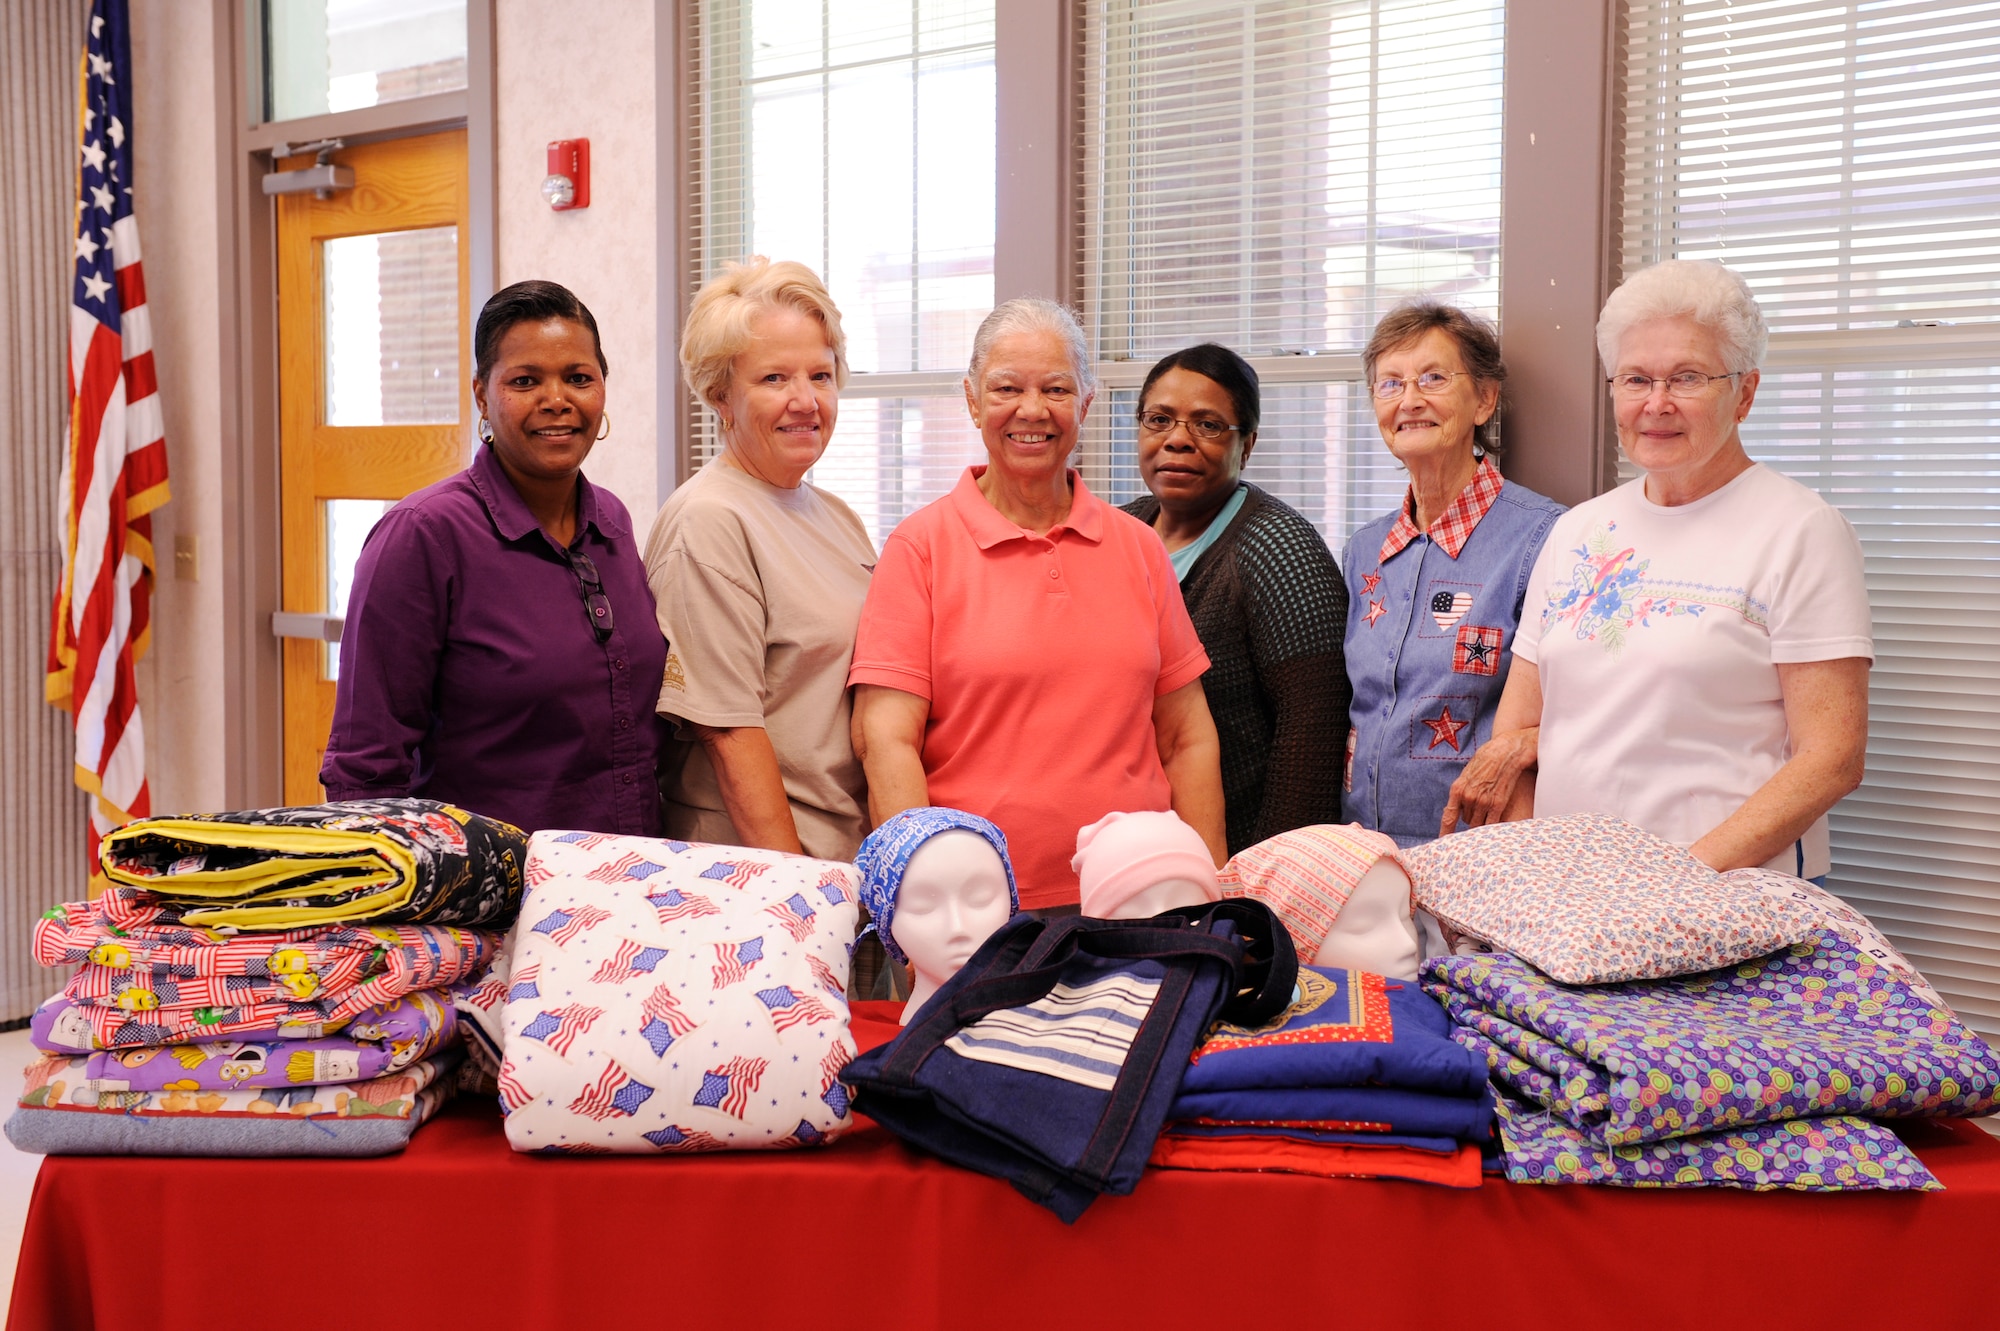 Sewing Ministry members (from left) Helen Davis, Bobbie Waddell, Ora Brown, Victoria Deramus, Barbara Hamm and Rachel Whiting displays the crafts created by the club members. The club makes blankets, hats and other domestic goods for needy recipients. (U.S. Air Force photo by Airman Lausanne Pacheco)